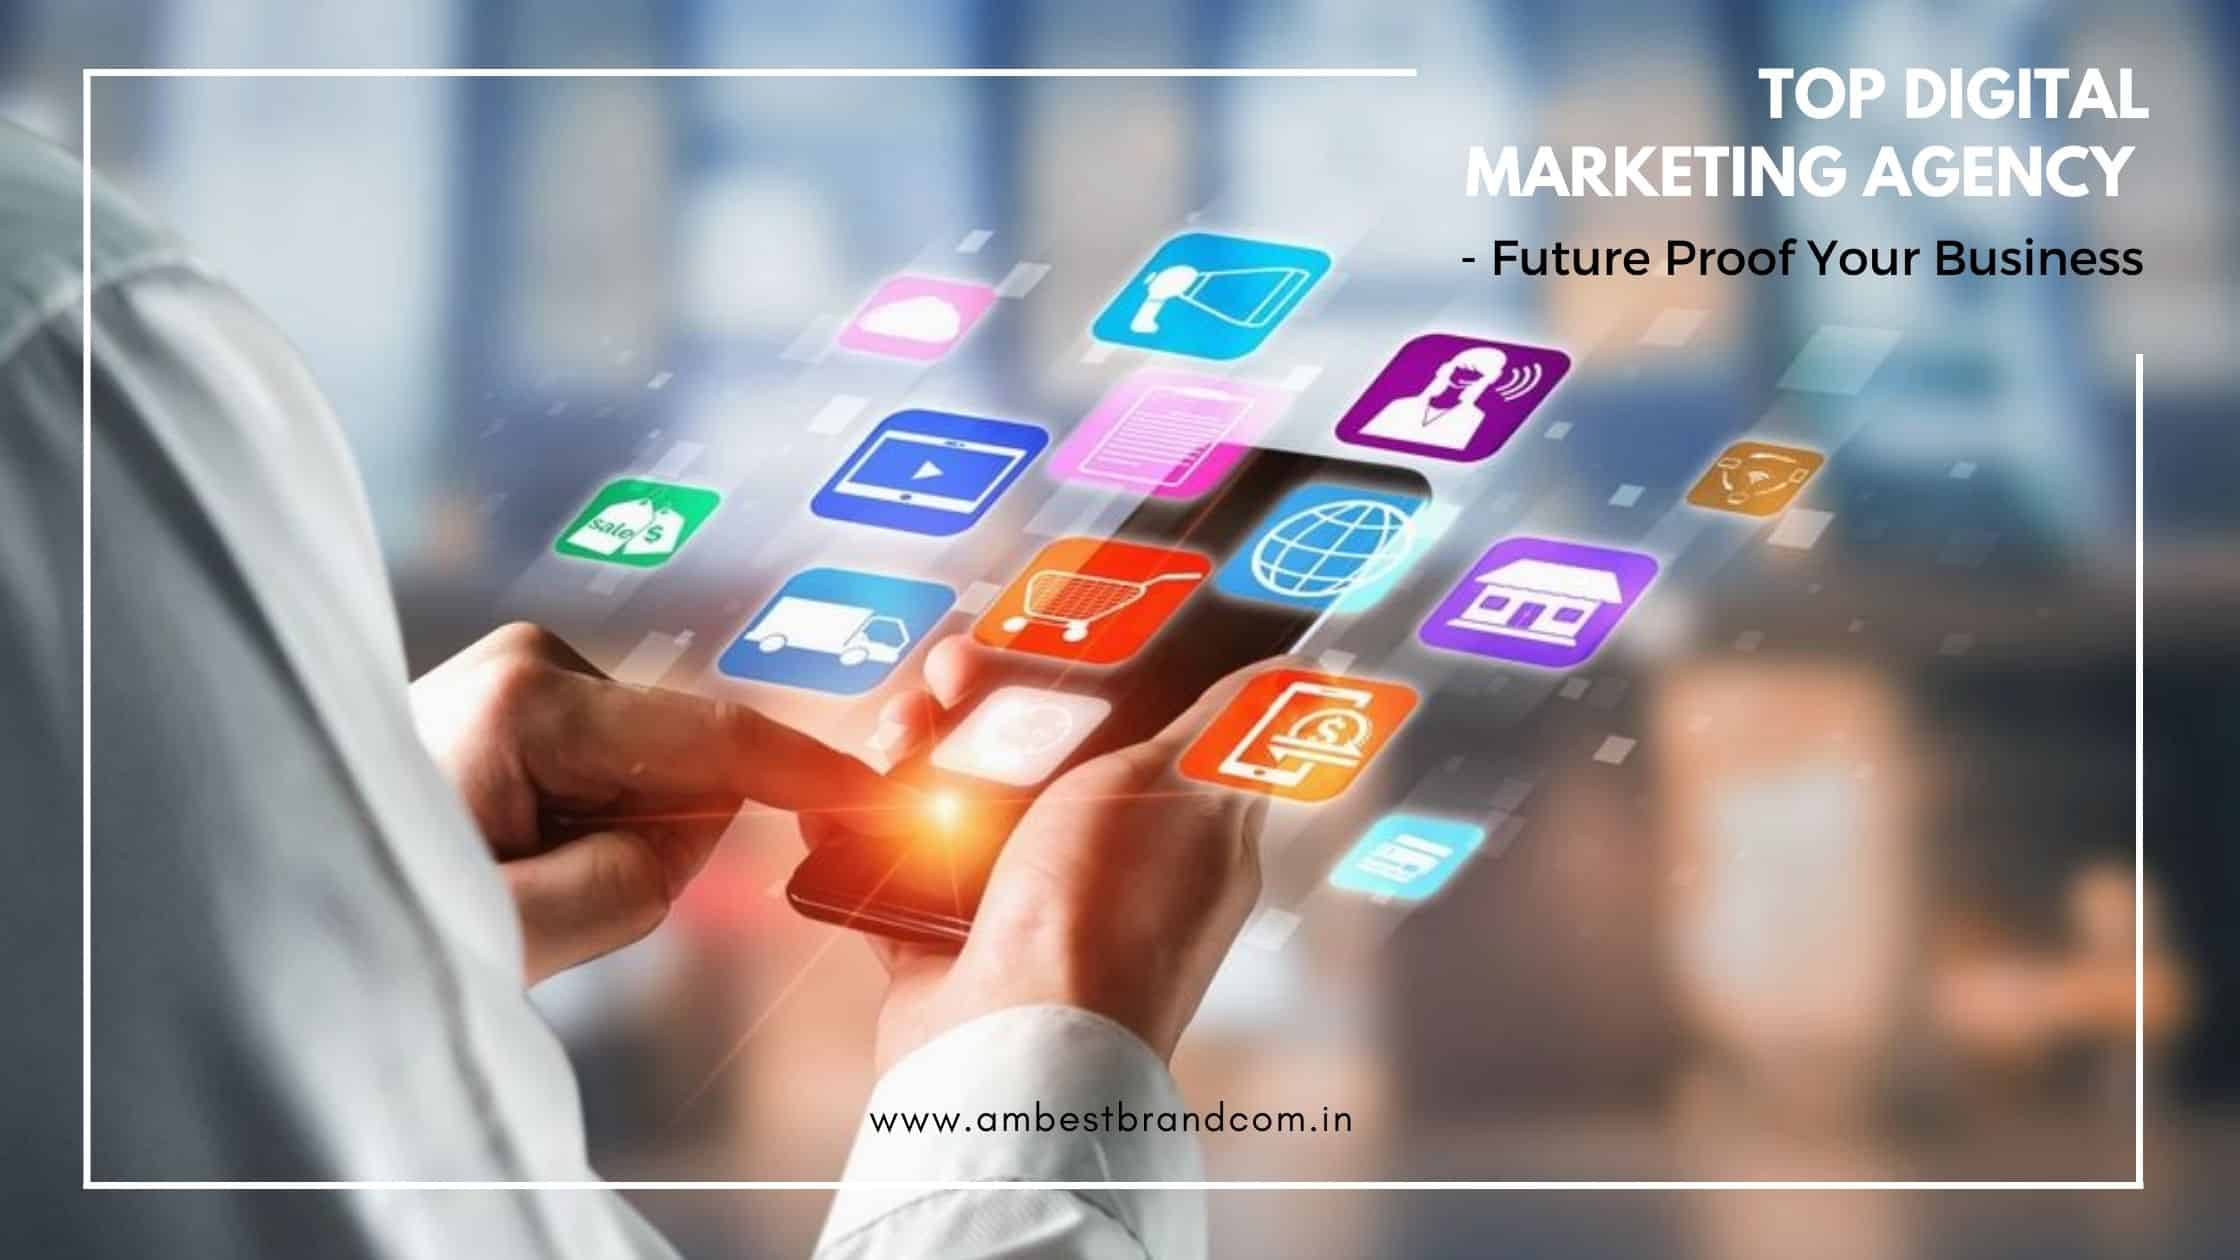 Top Digital Marketing Agency – Future Proof Your Business